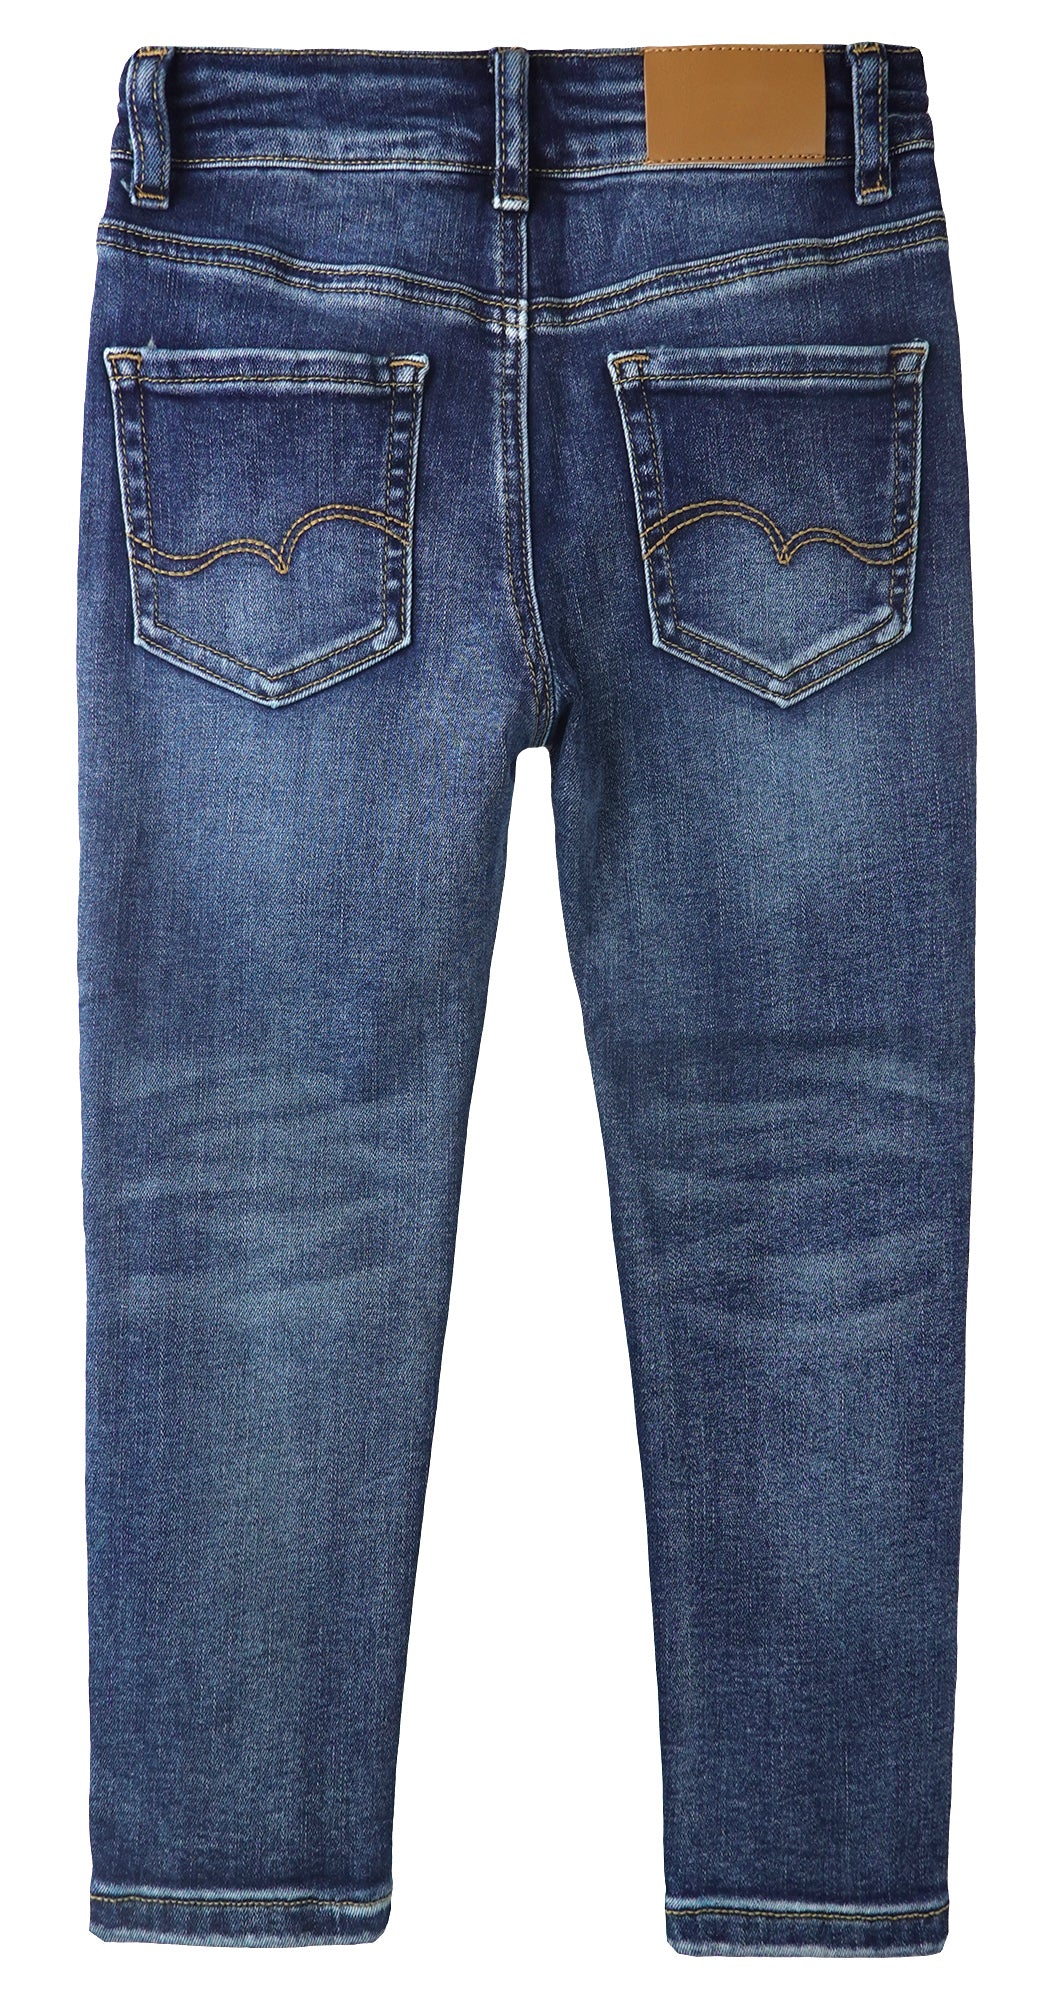 Little Girls Jeans, 5-14T Washed Distressed Elastic Waistband Inside Stretchy Denim Pants